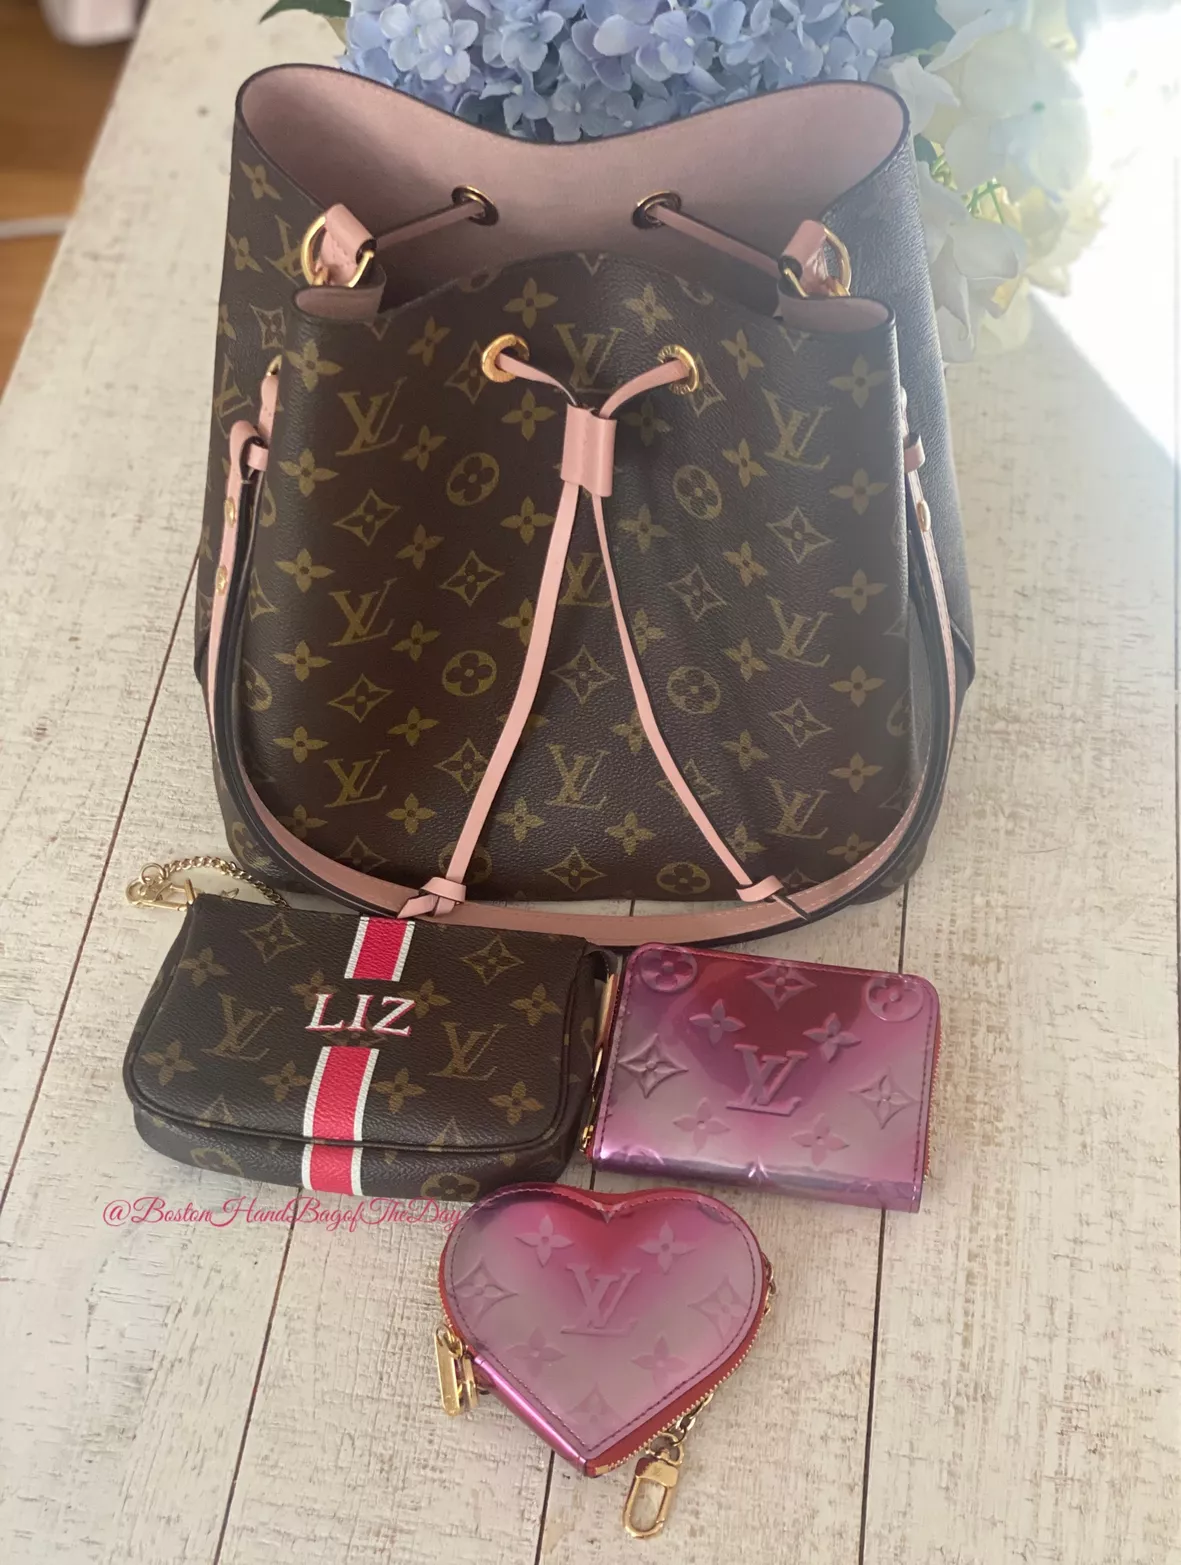 Happy Monogram Monday! Shop available LV Monogram on our website